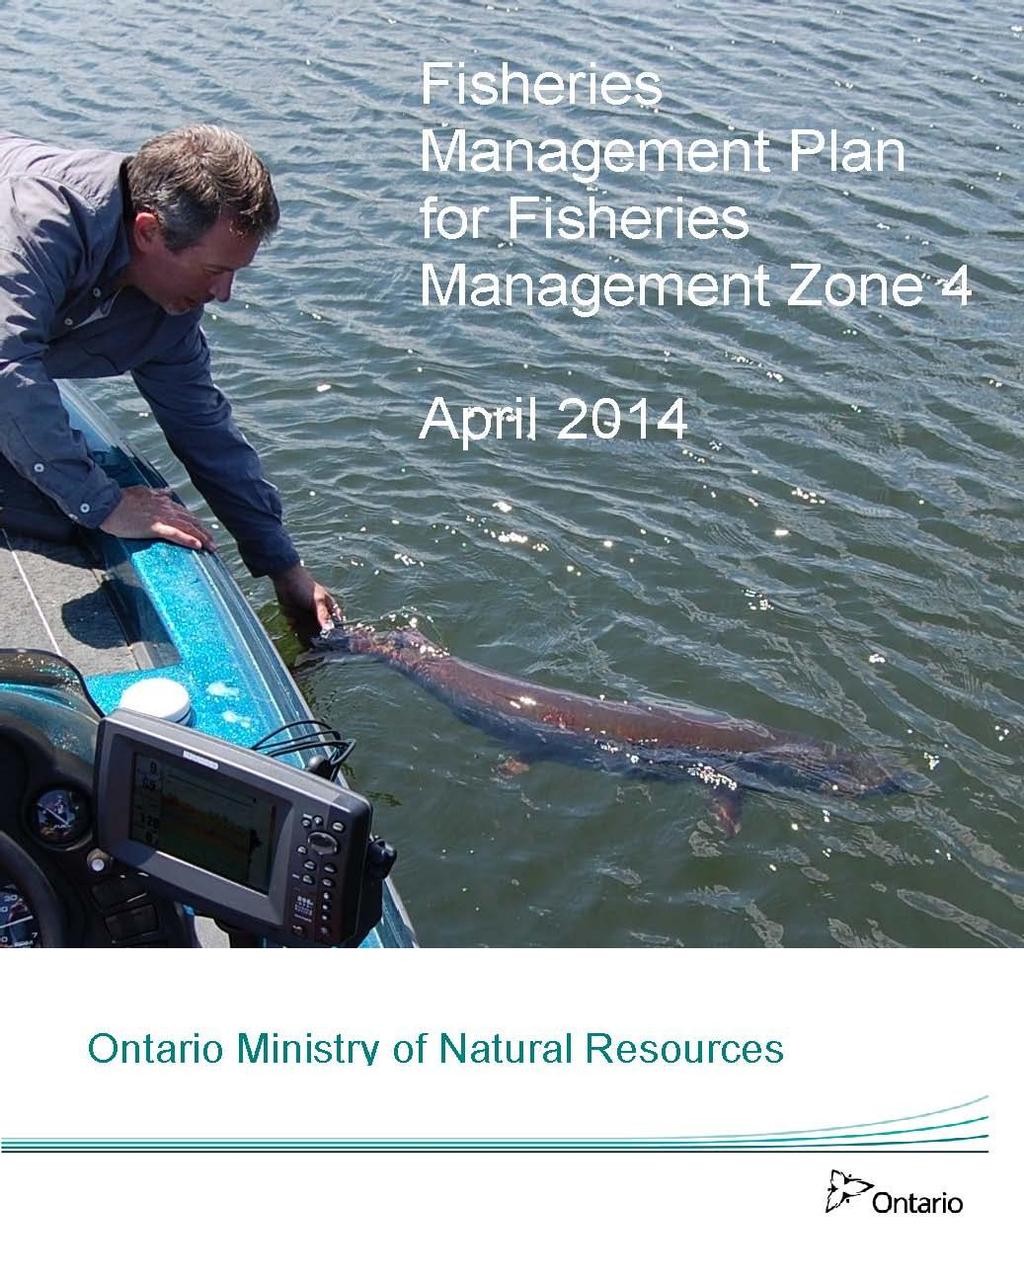 Fisheries Management Plan for Fisheries Management